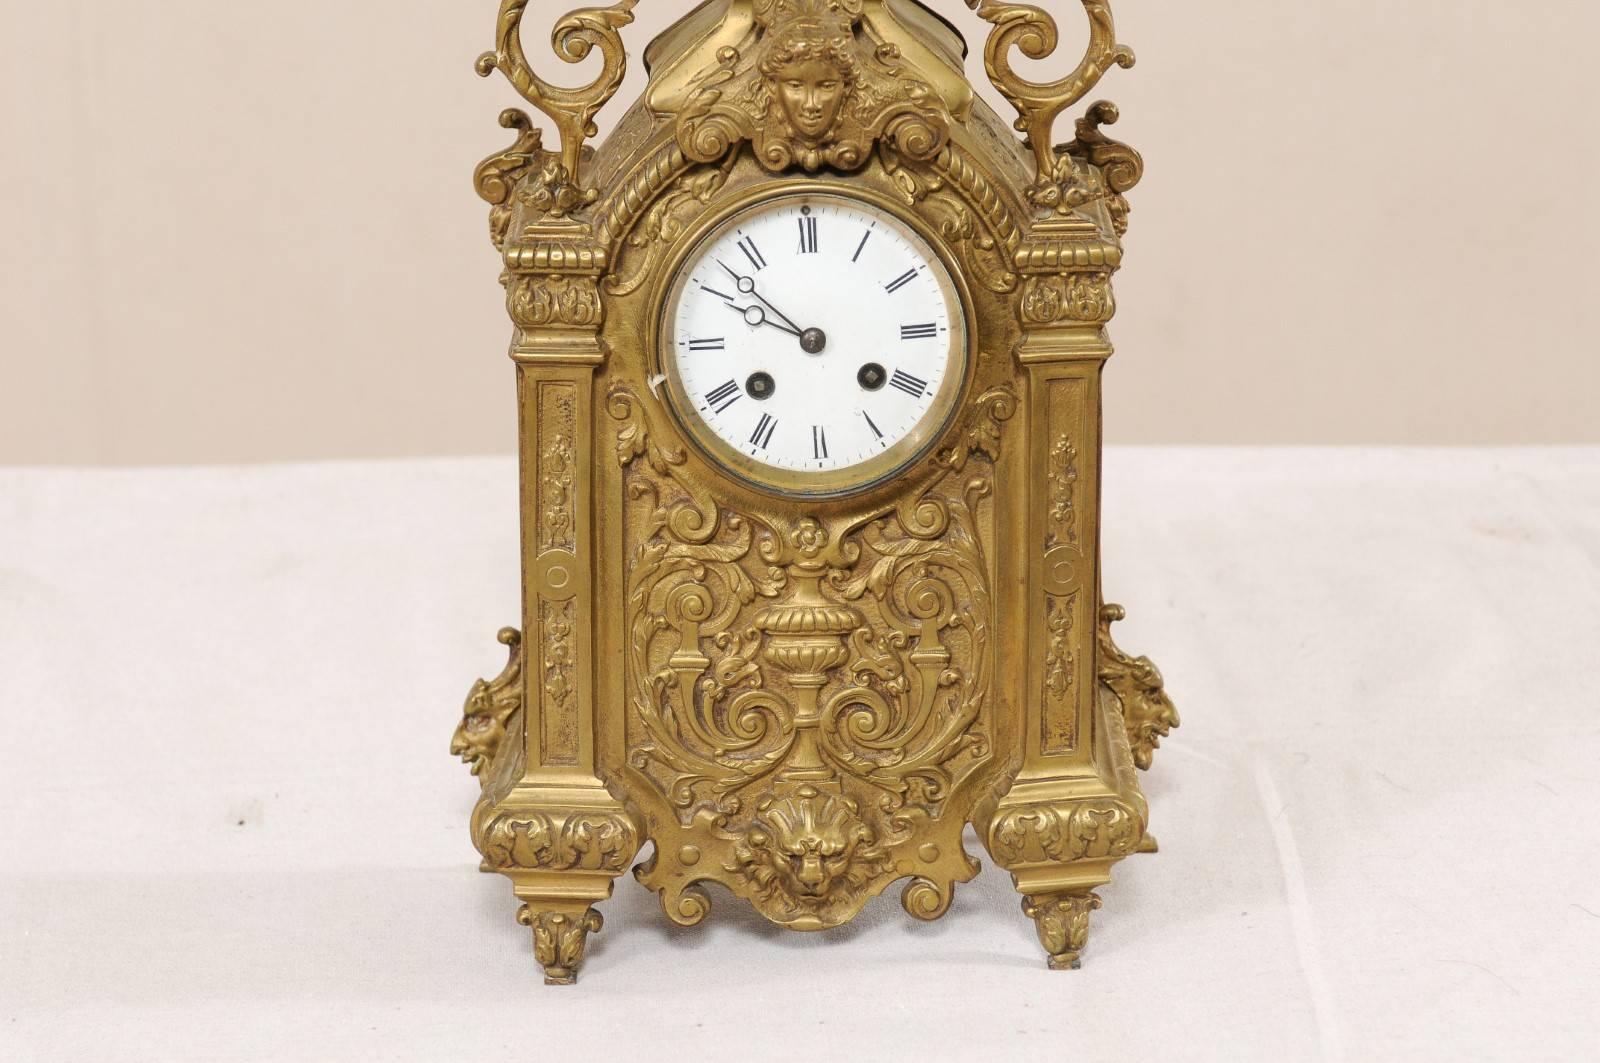 An ornately decorated French brass mantel clock from the turn of the 19th and 20th century. This antique French clock is exquisitely decorated on all sides, it has an overall scrolling foliage, acanthus leaf, and urn motif, with a pair of winged